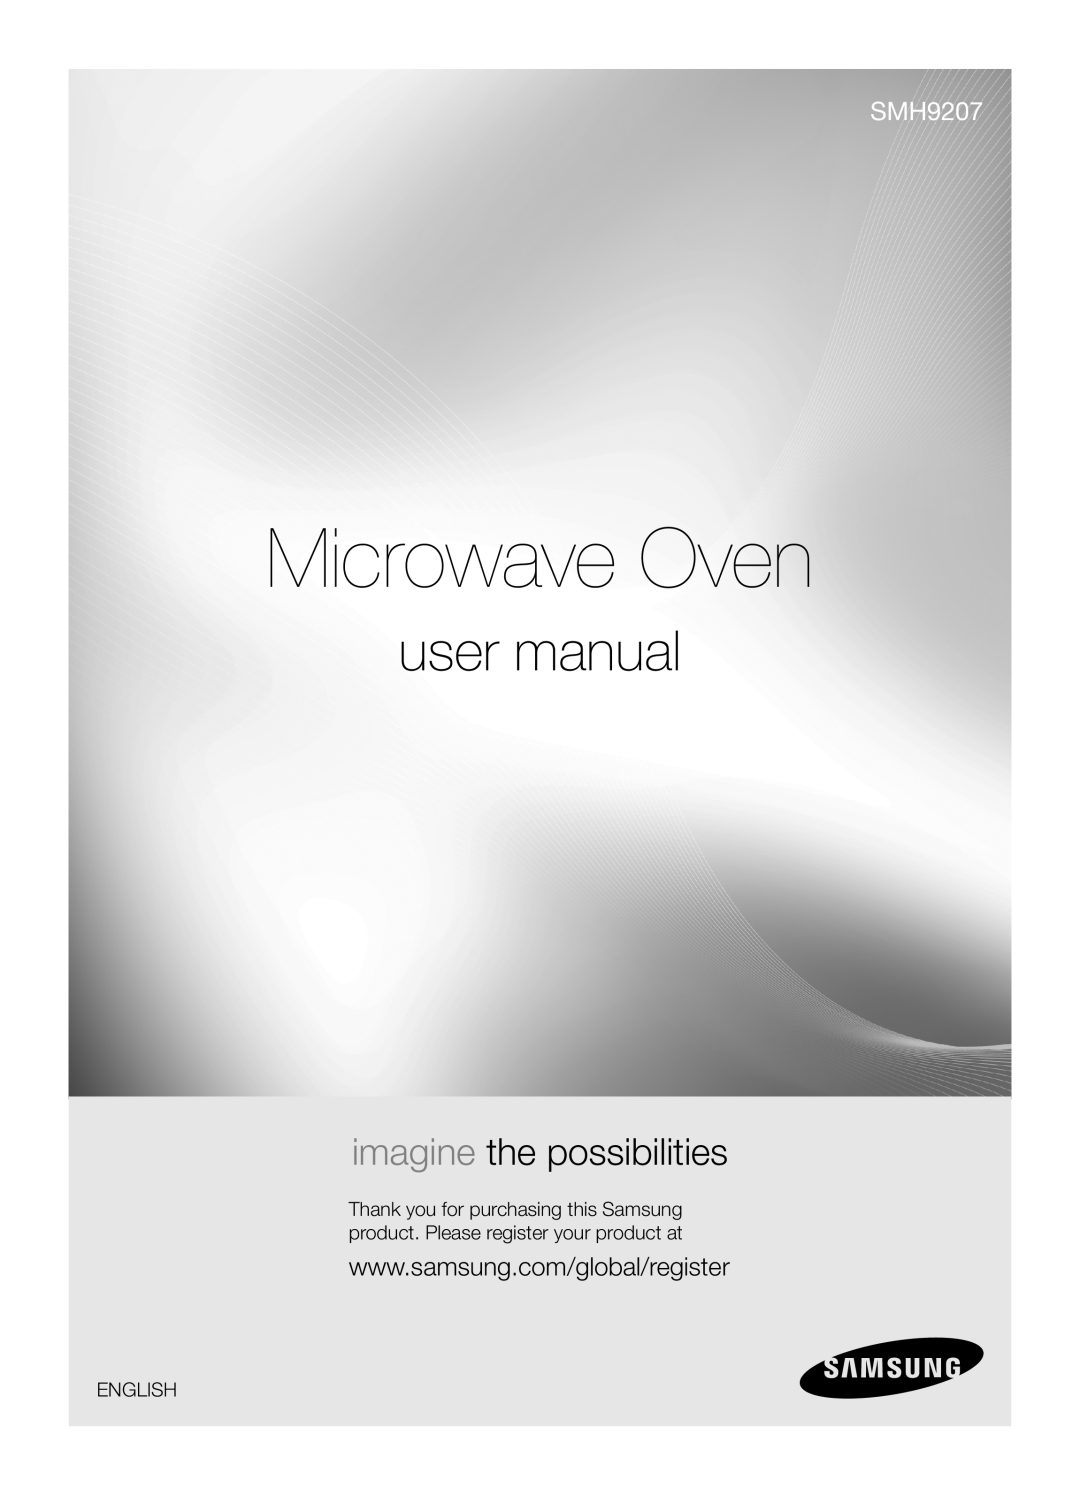 Samsung SMH9207ST user manual Microwave Oven, imagine the possibilities, English 